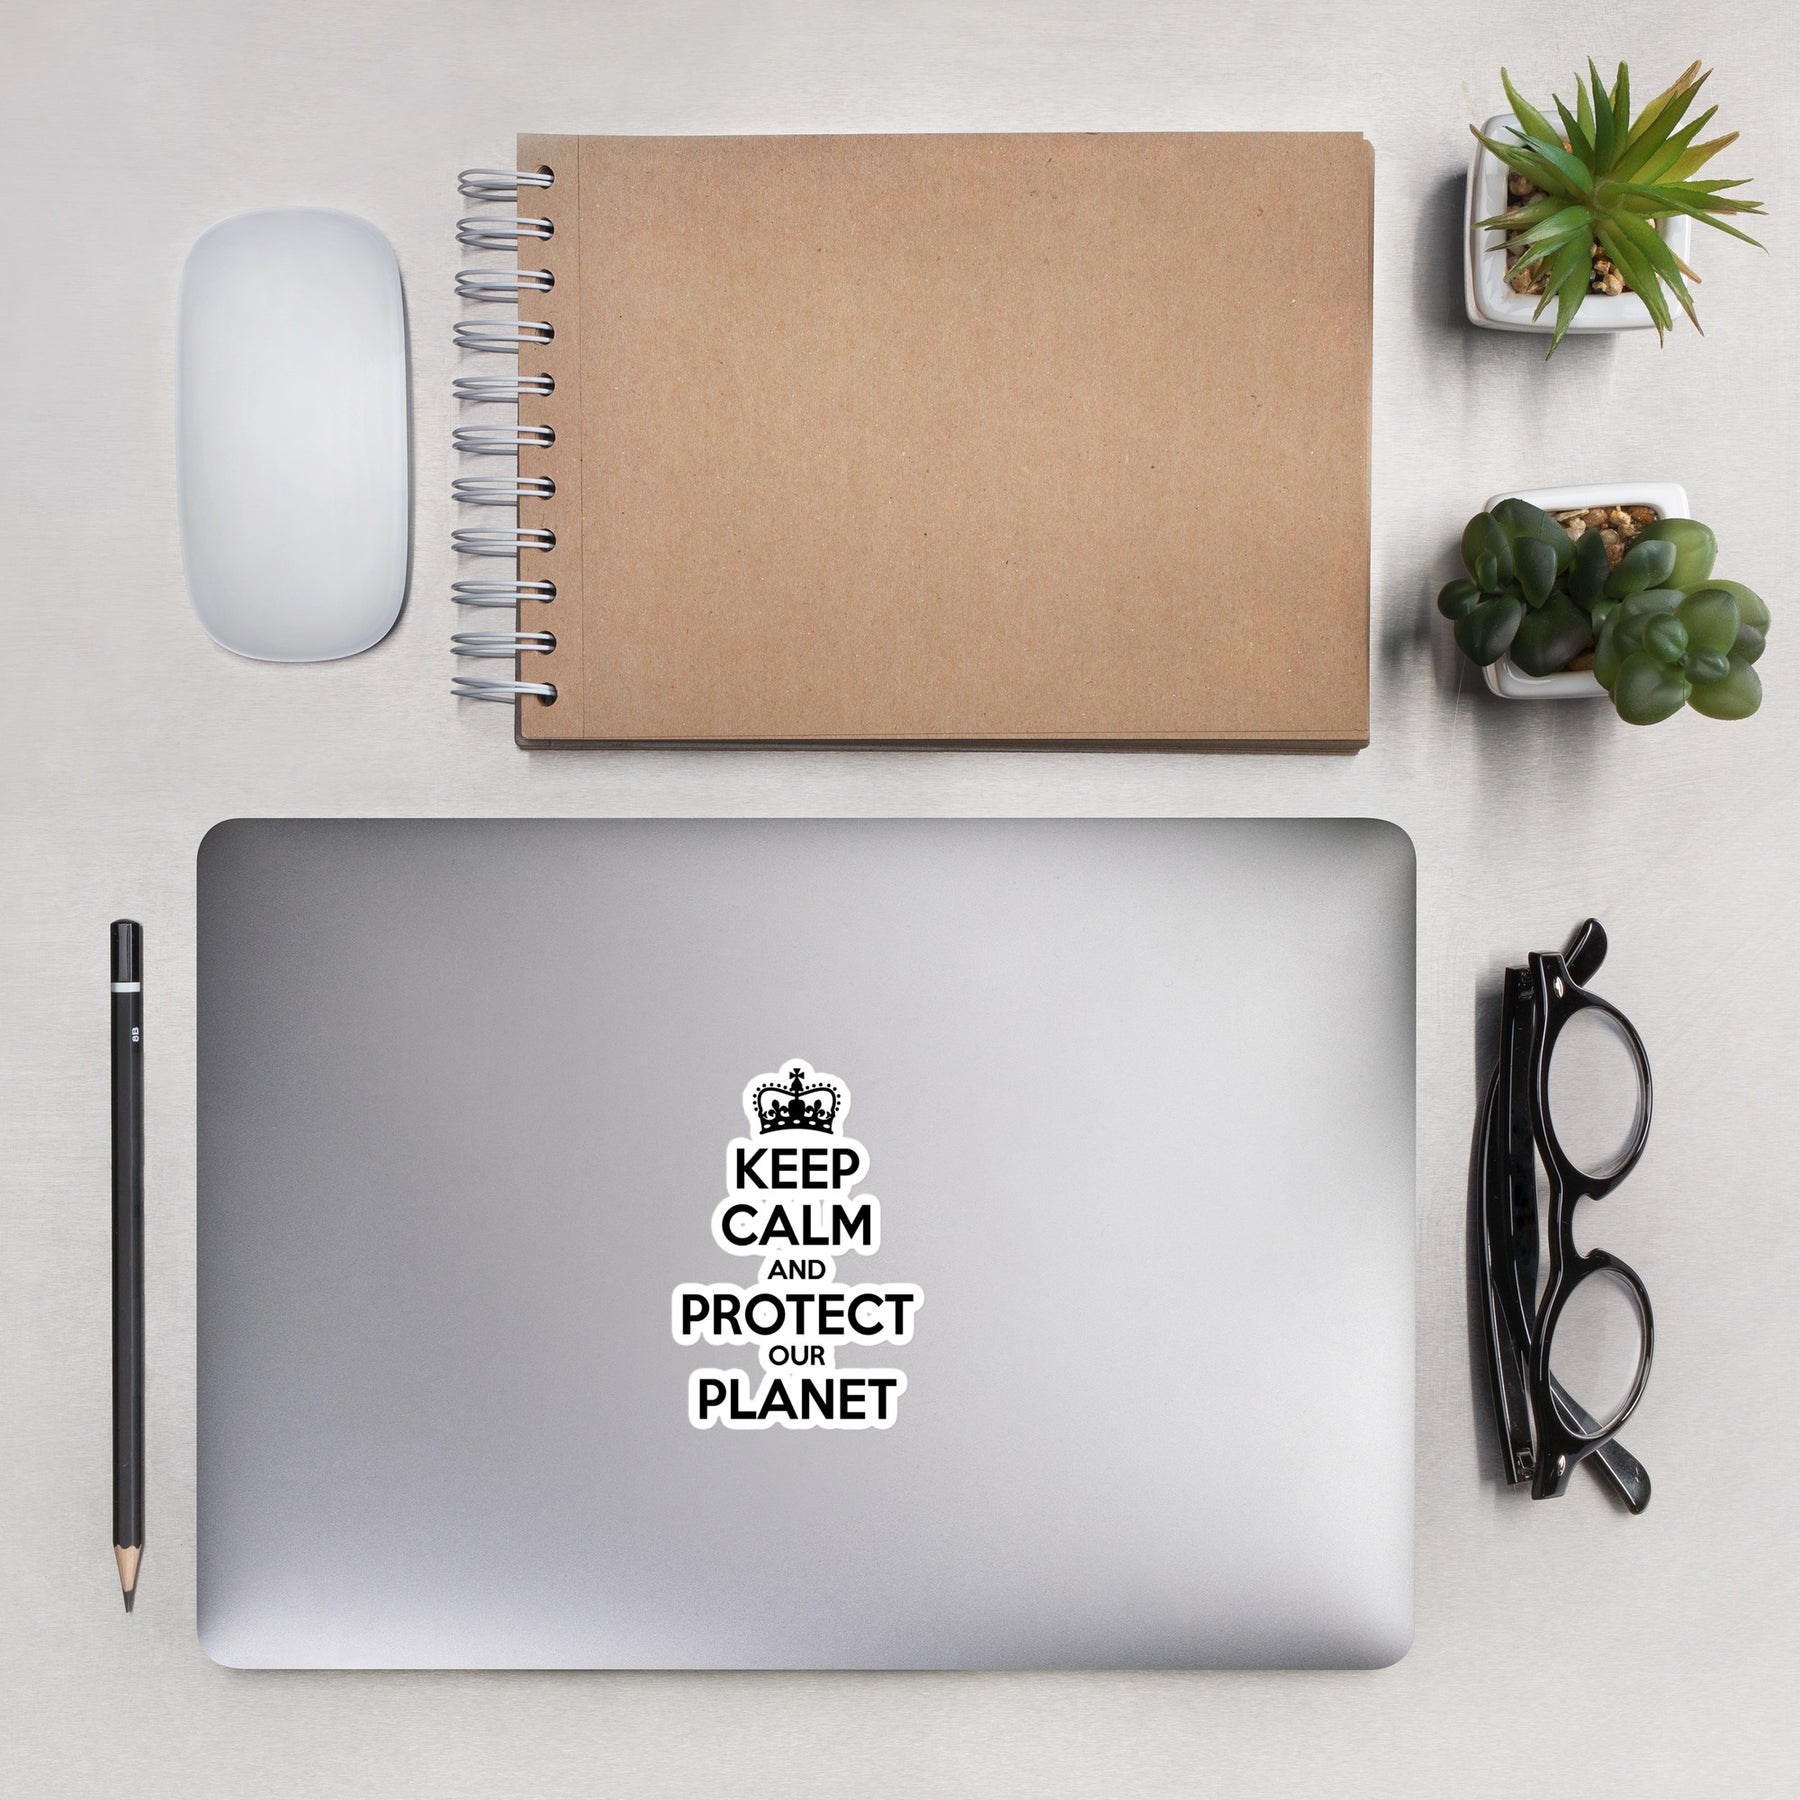 KEEP CALM PROTECT OUR PLANET Sticker